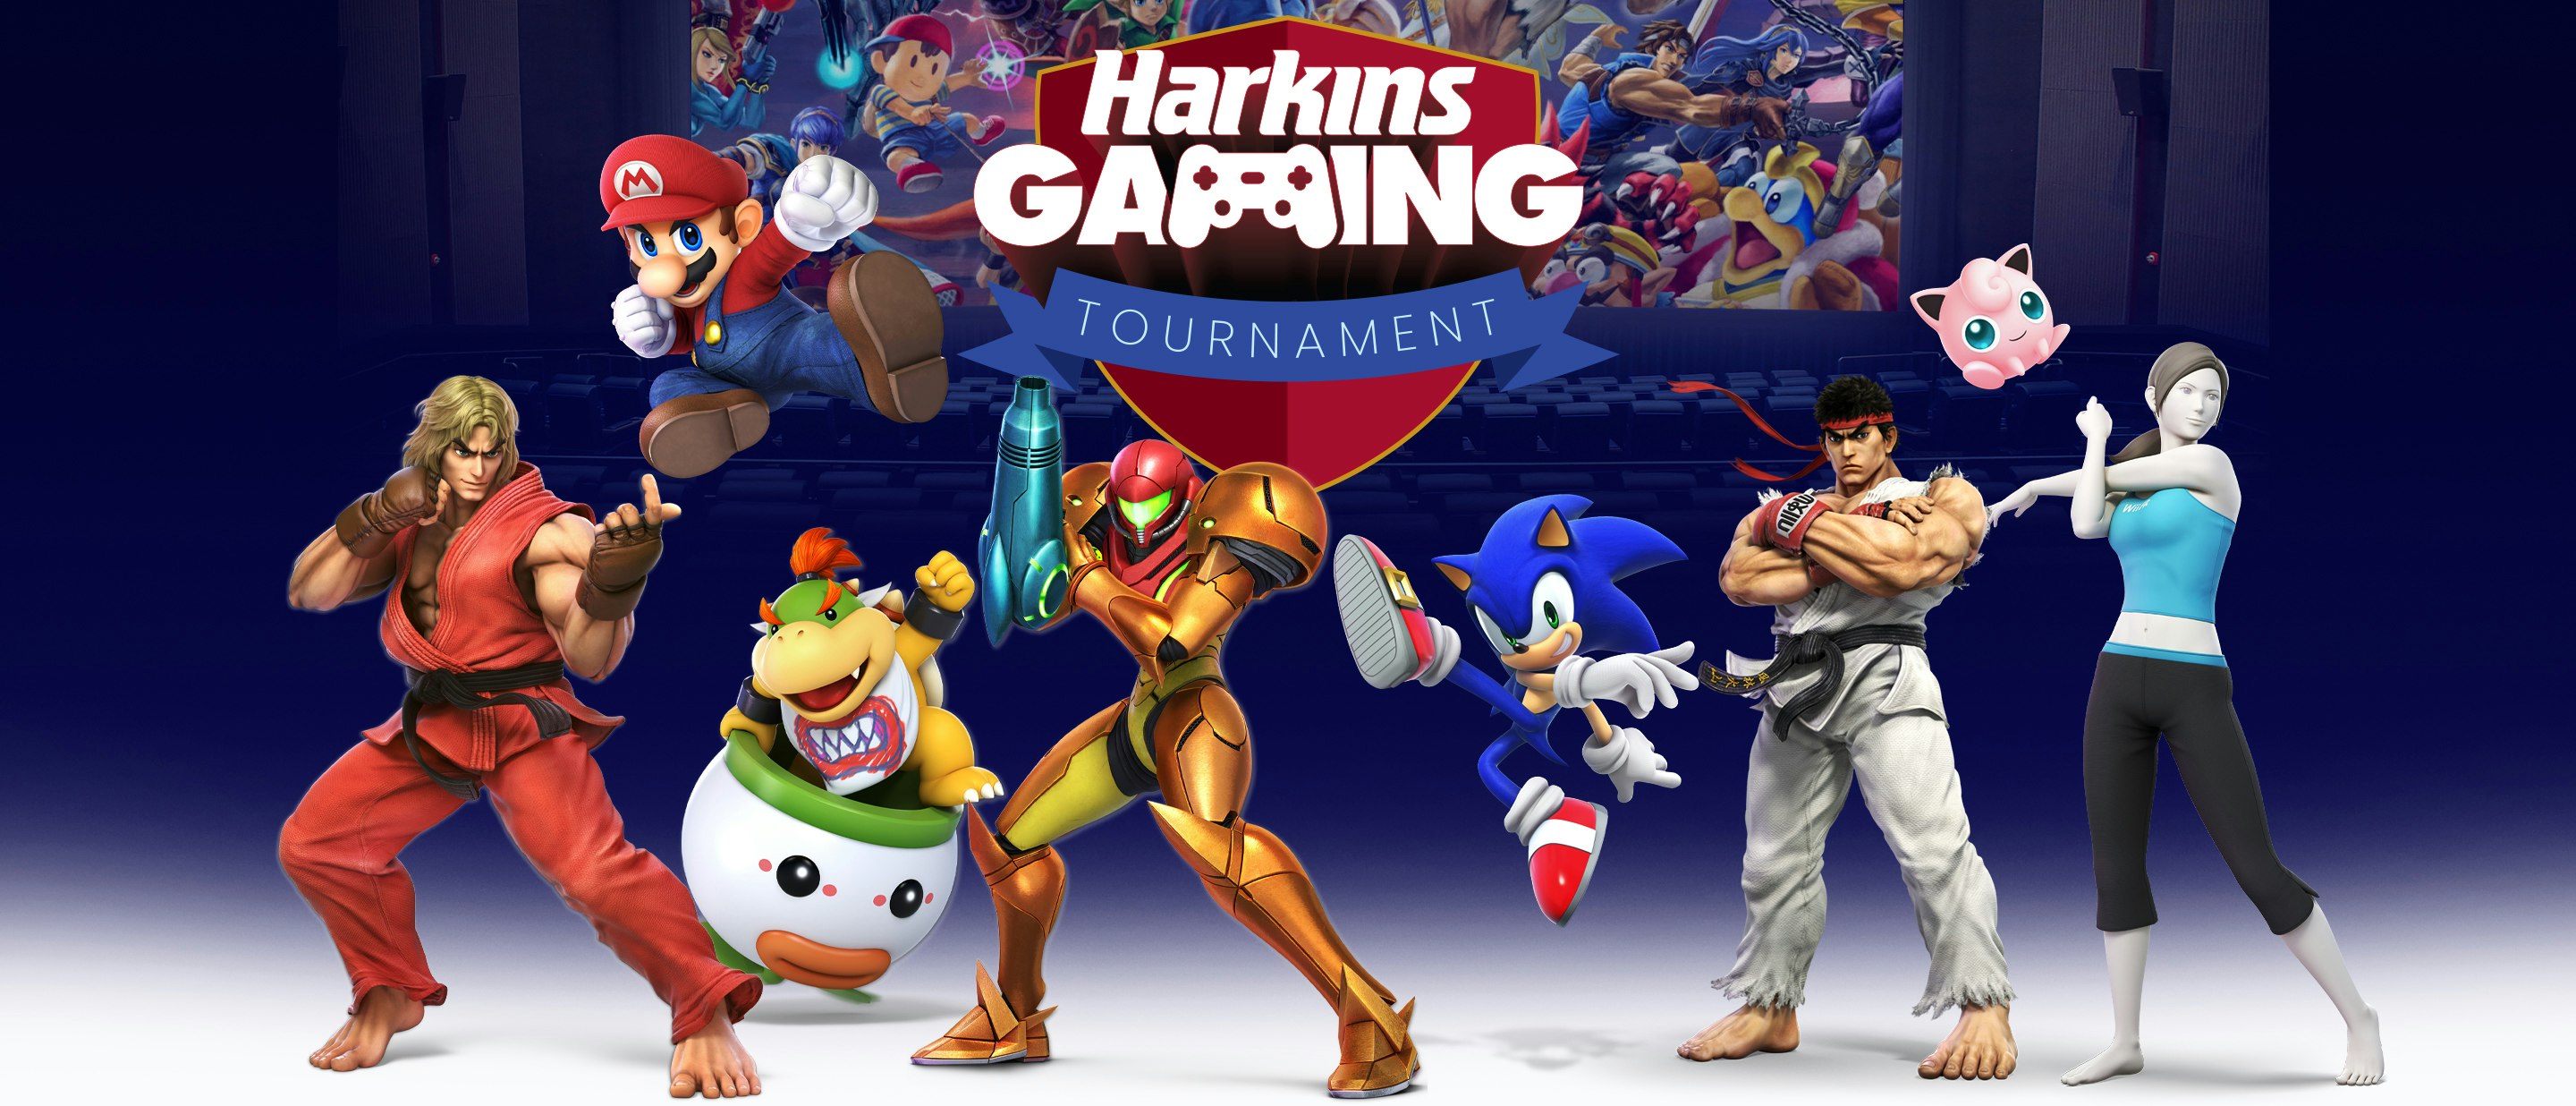 Gaming on the BIG screen! Join us for Harkins Ultimate Gaming Tournament.